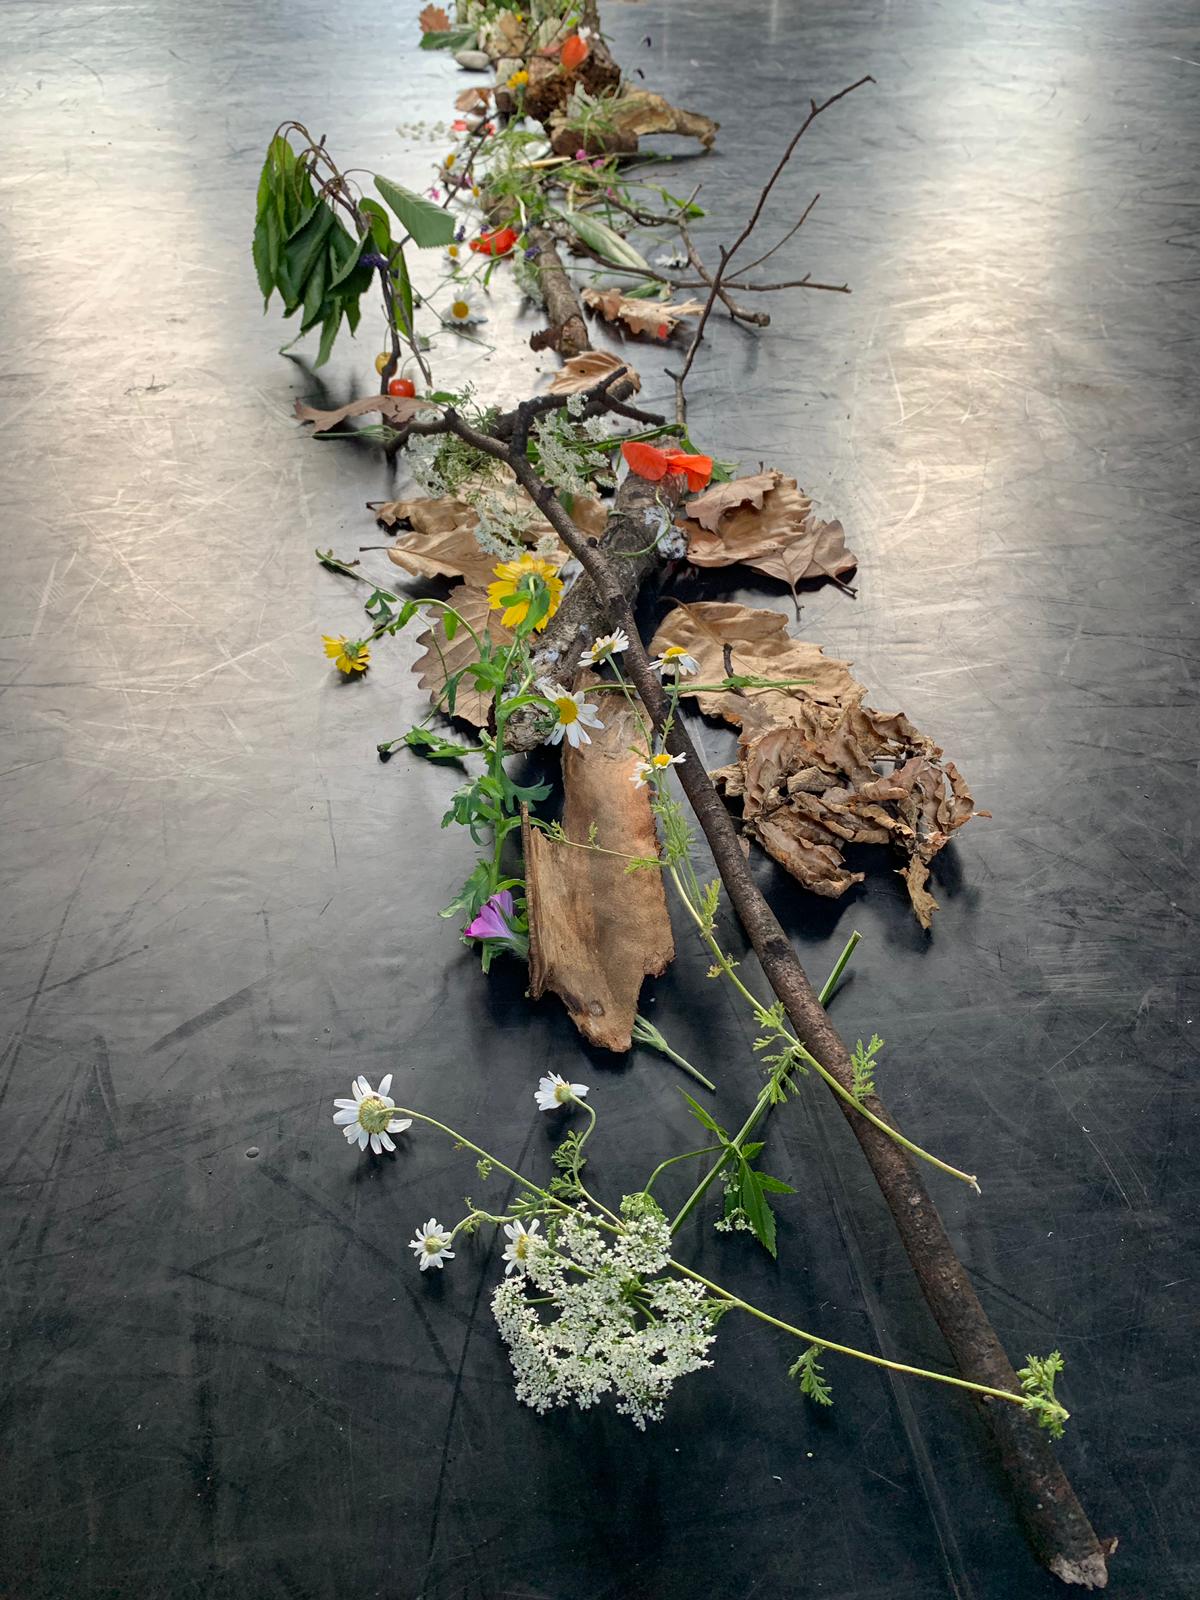 Flowers, bark, branches and leaves arranged on a floor